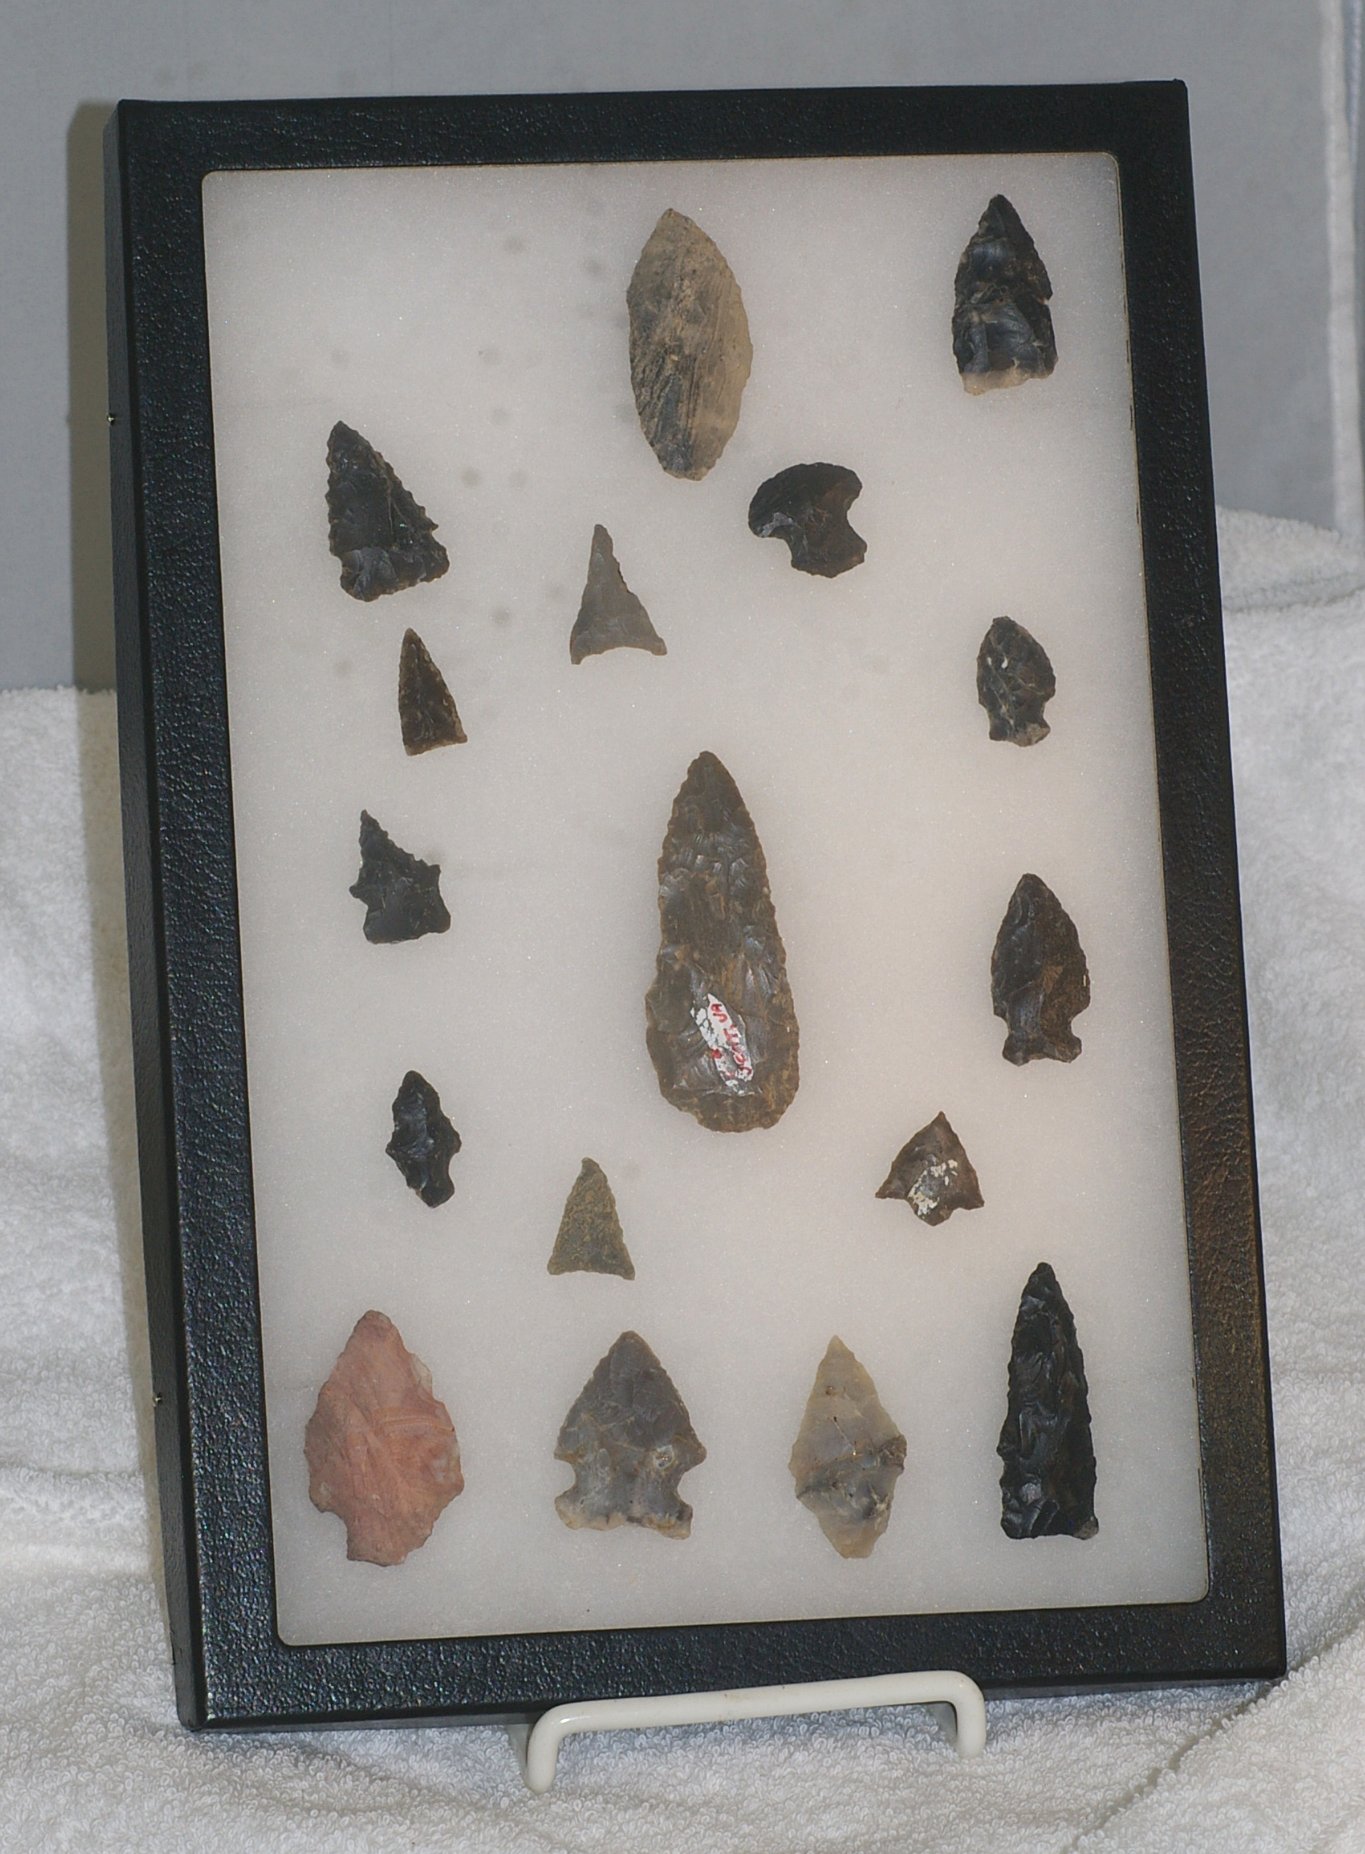 American Indian Artifacts with Arrowheads in Display Case